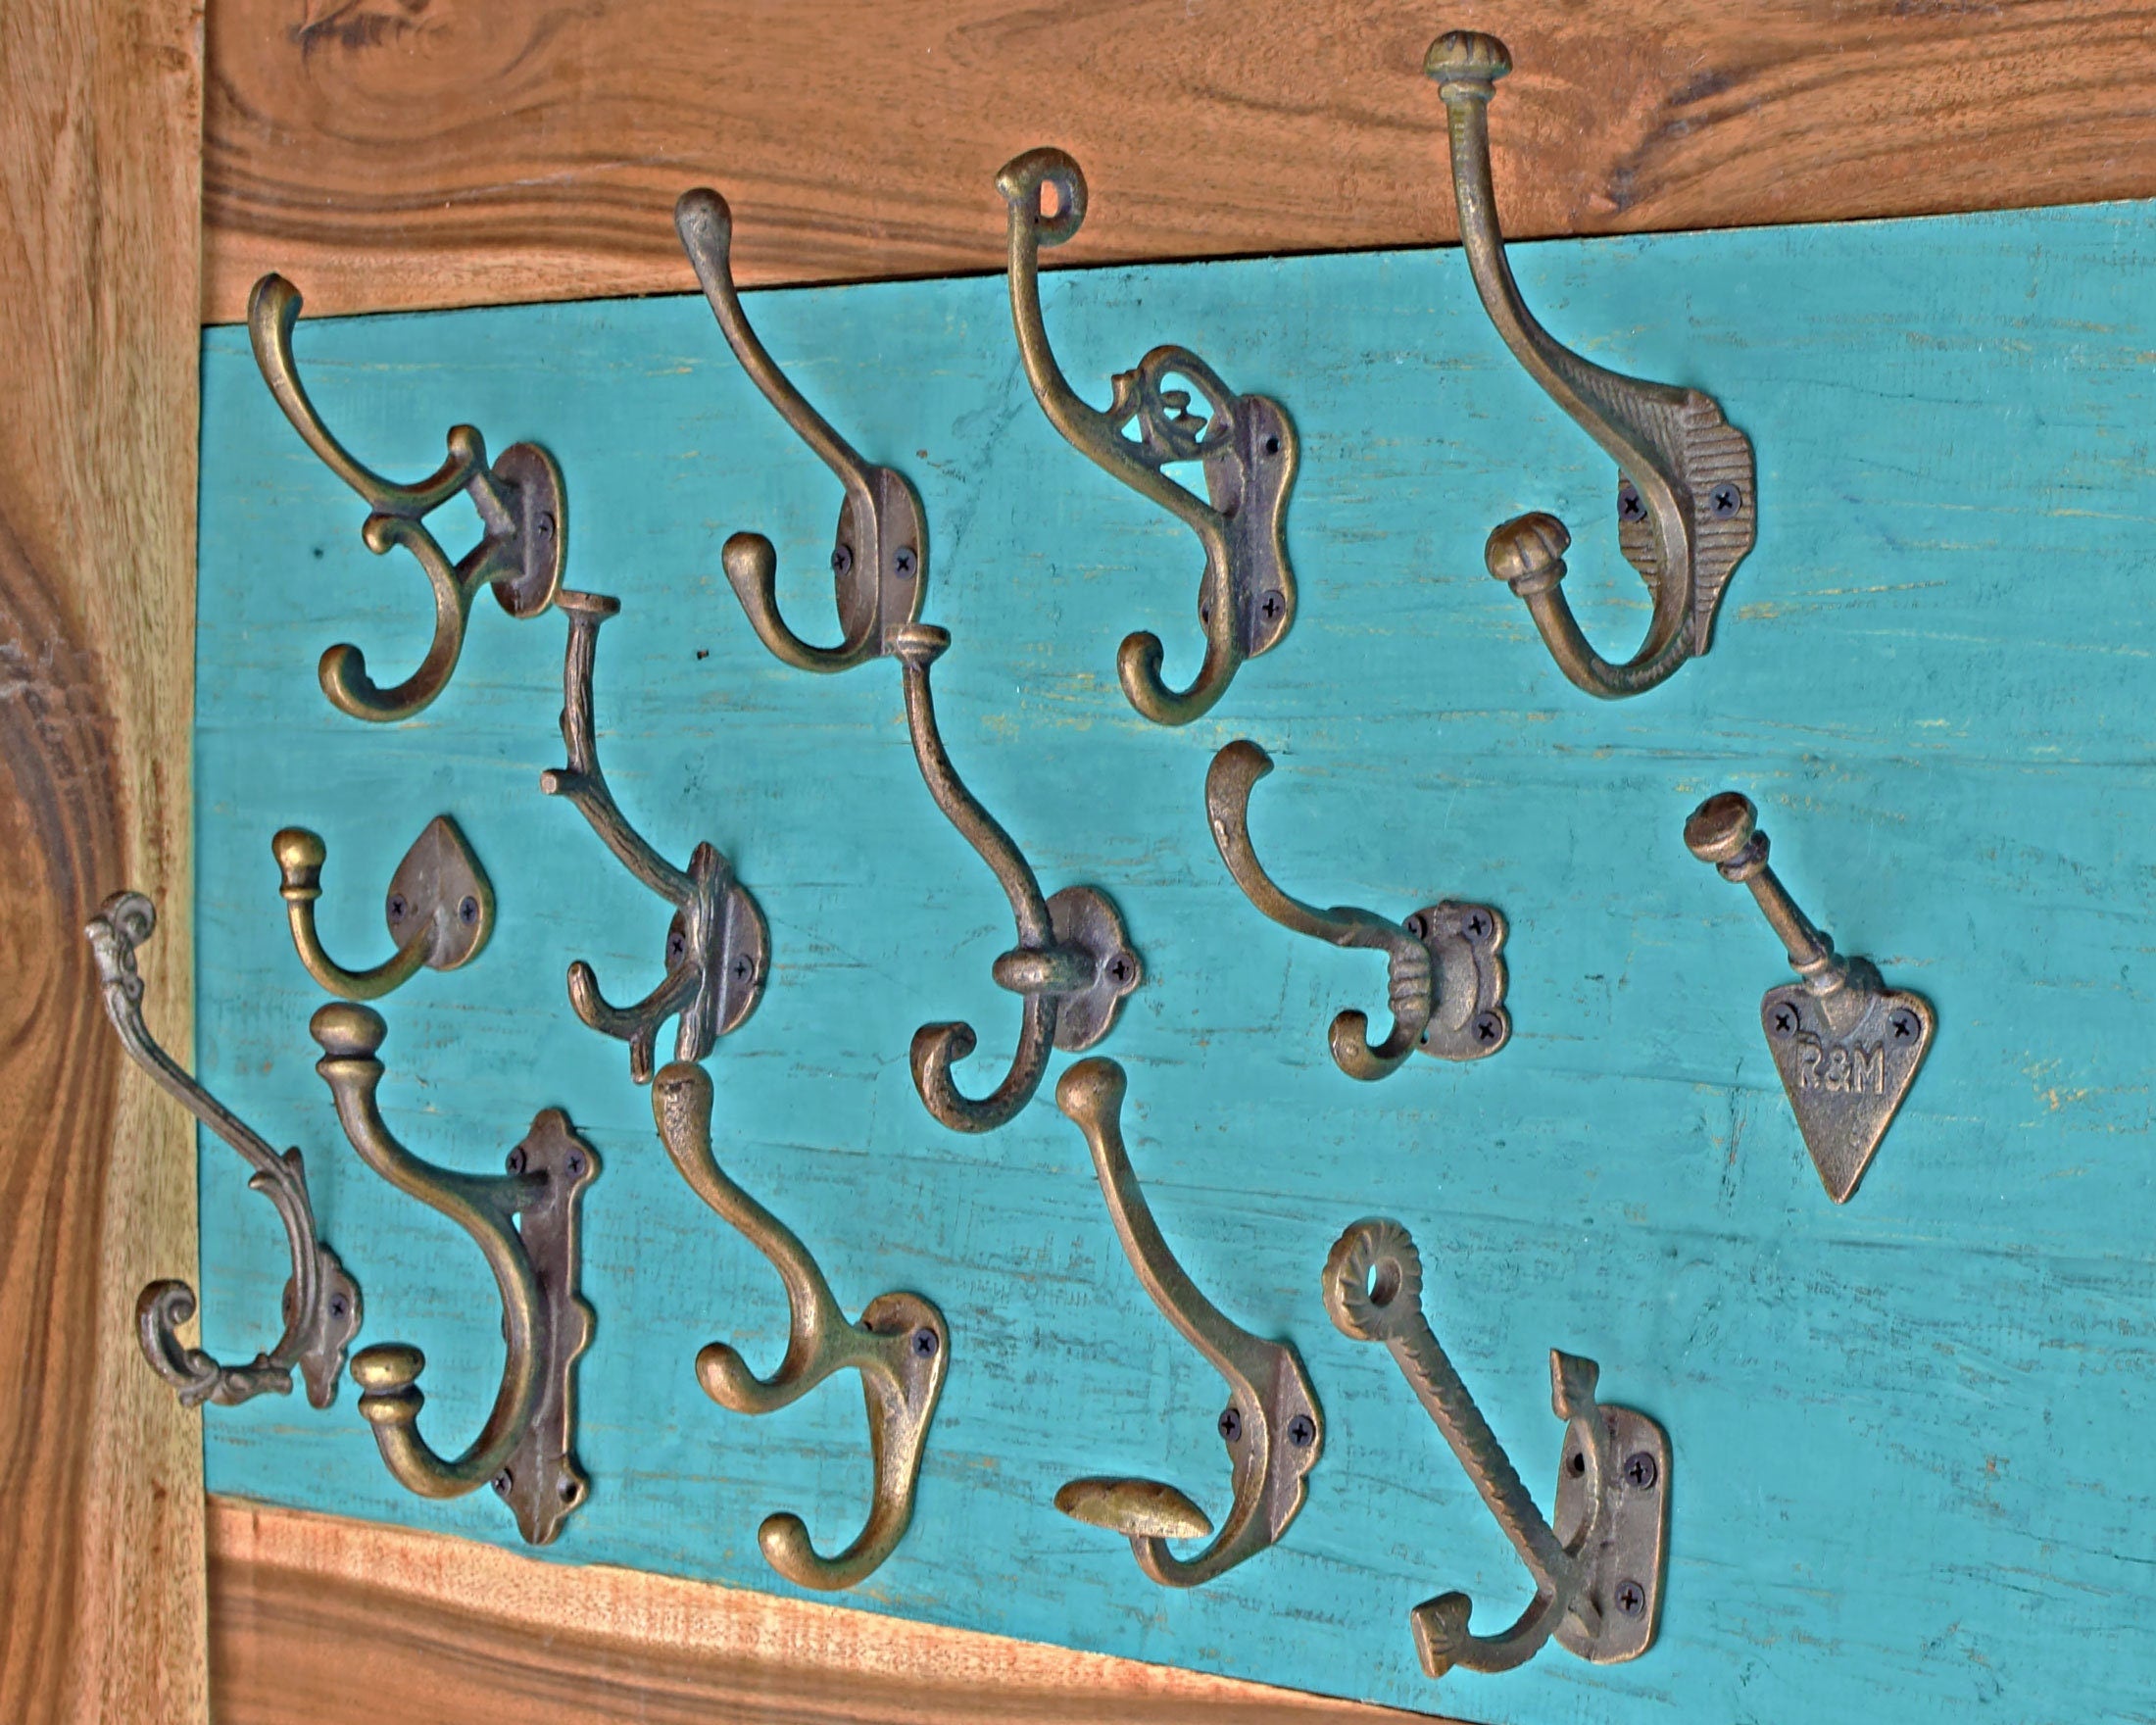 Vintage Cast Iron Wall Hooks (Antique Brass Finish), Rustic, Farmhouse Coat  Hooks, Great for Coats, Bags, Towels, Hats Classic - AliExpress